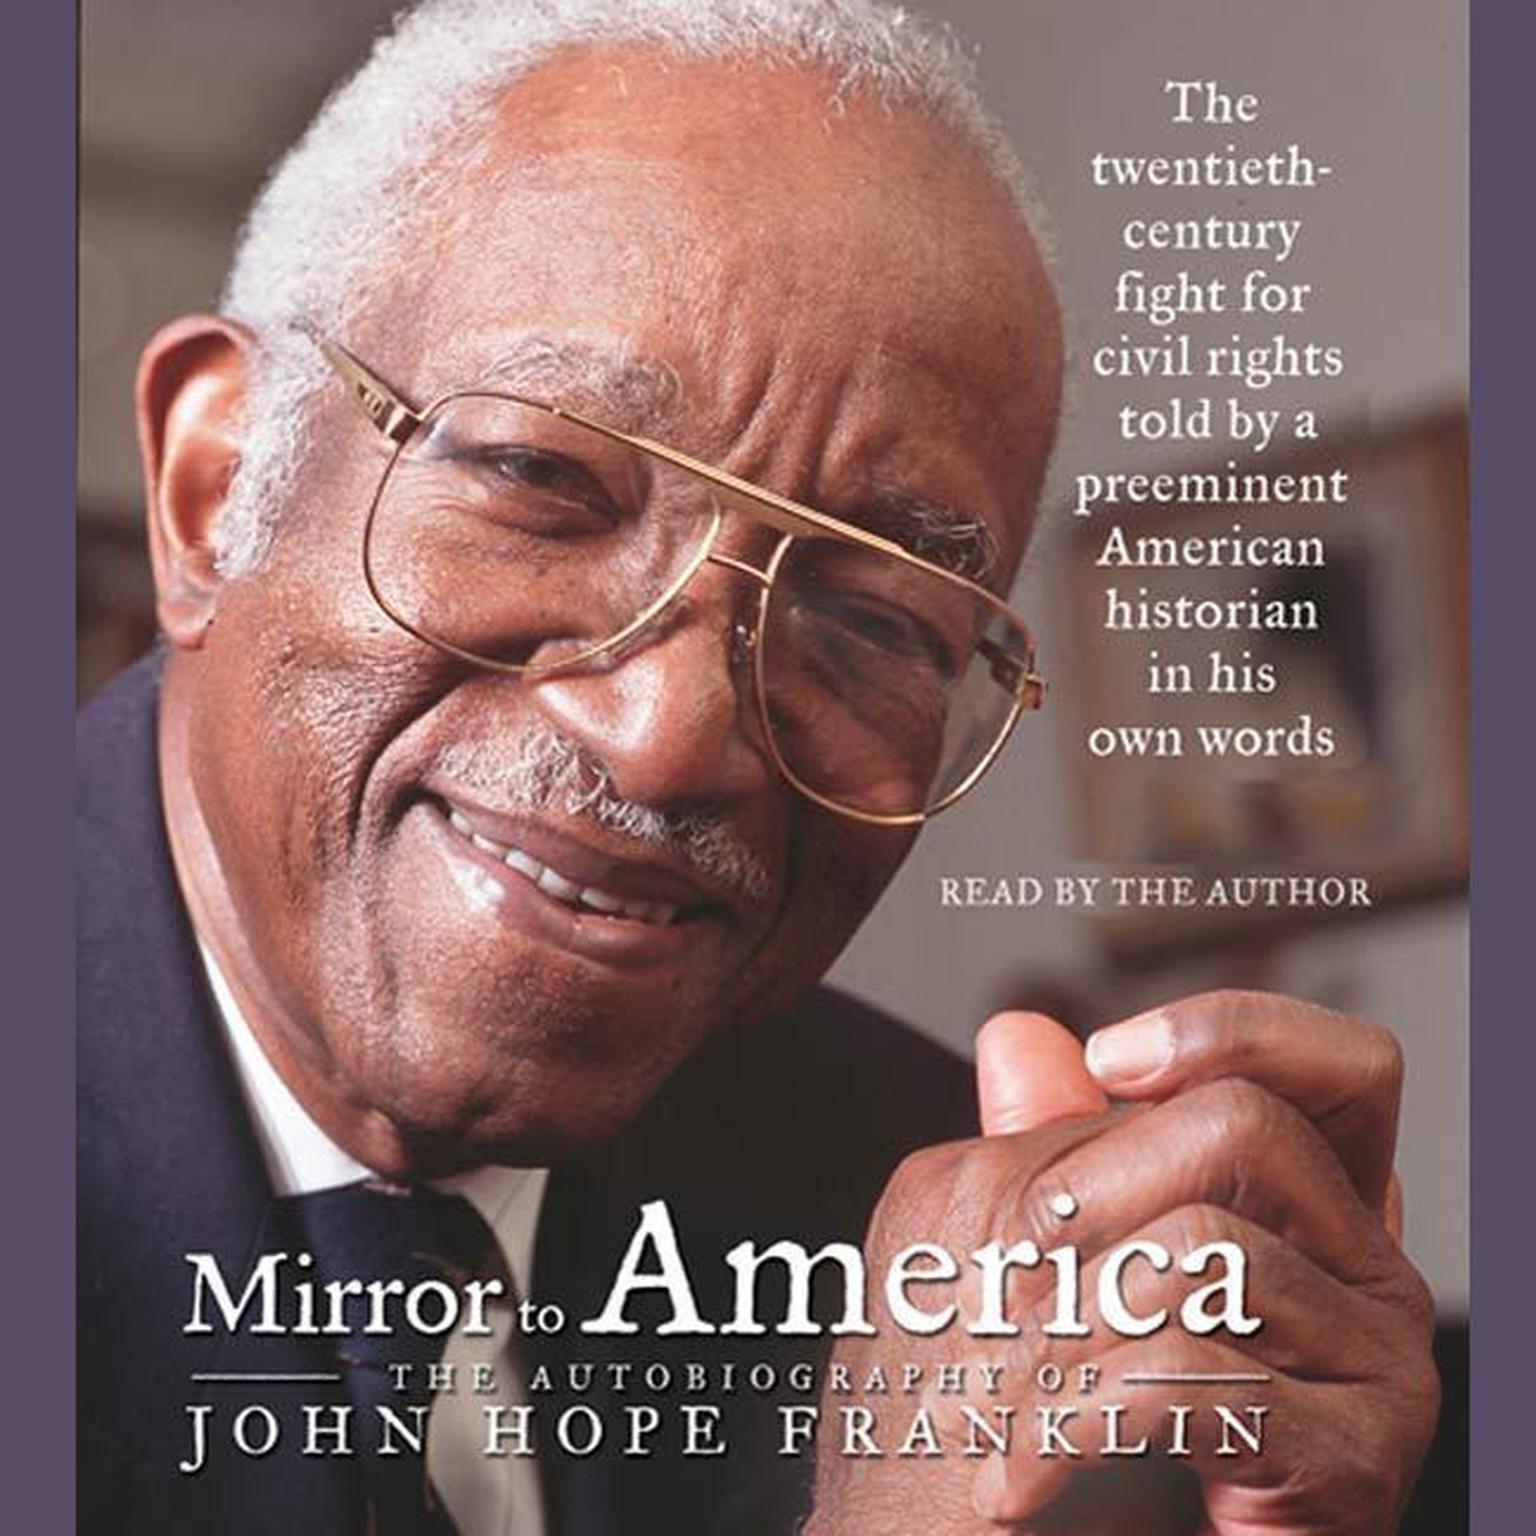 Mirror to America (Abridged): The Autobiography of John Hope Franklin Audiobook, by John Hope Franklin